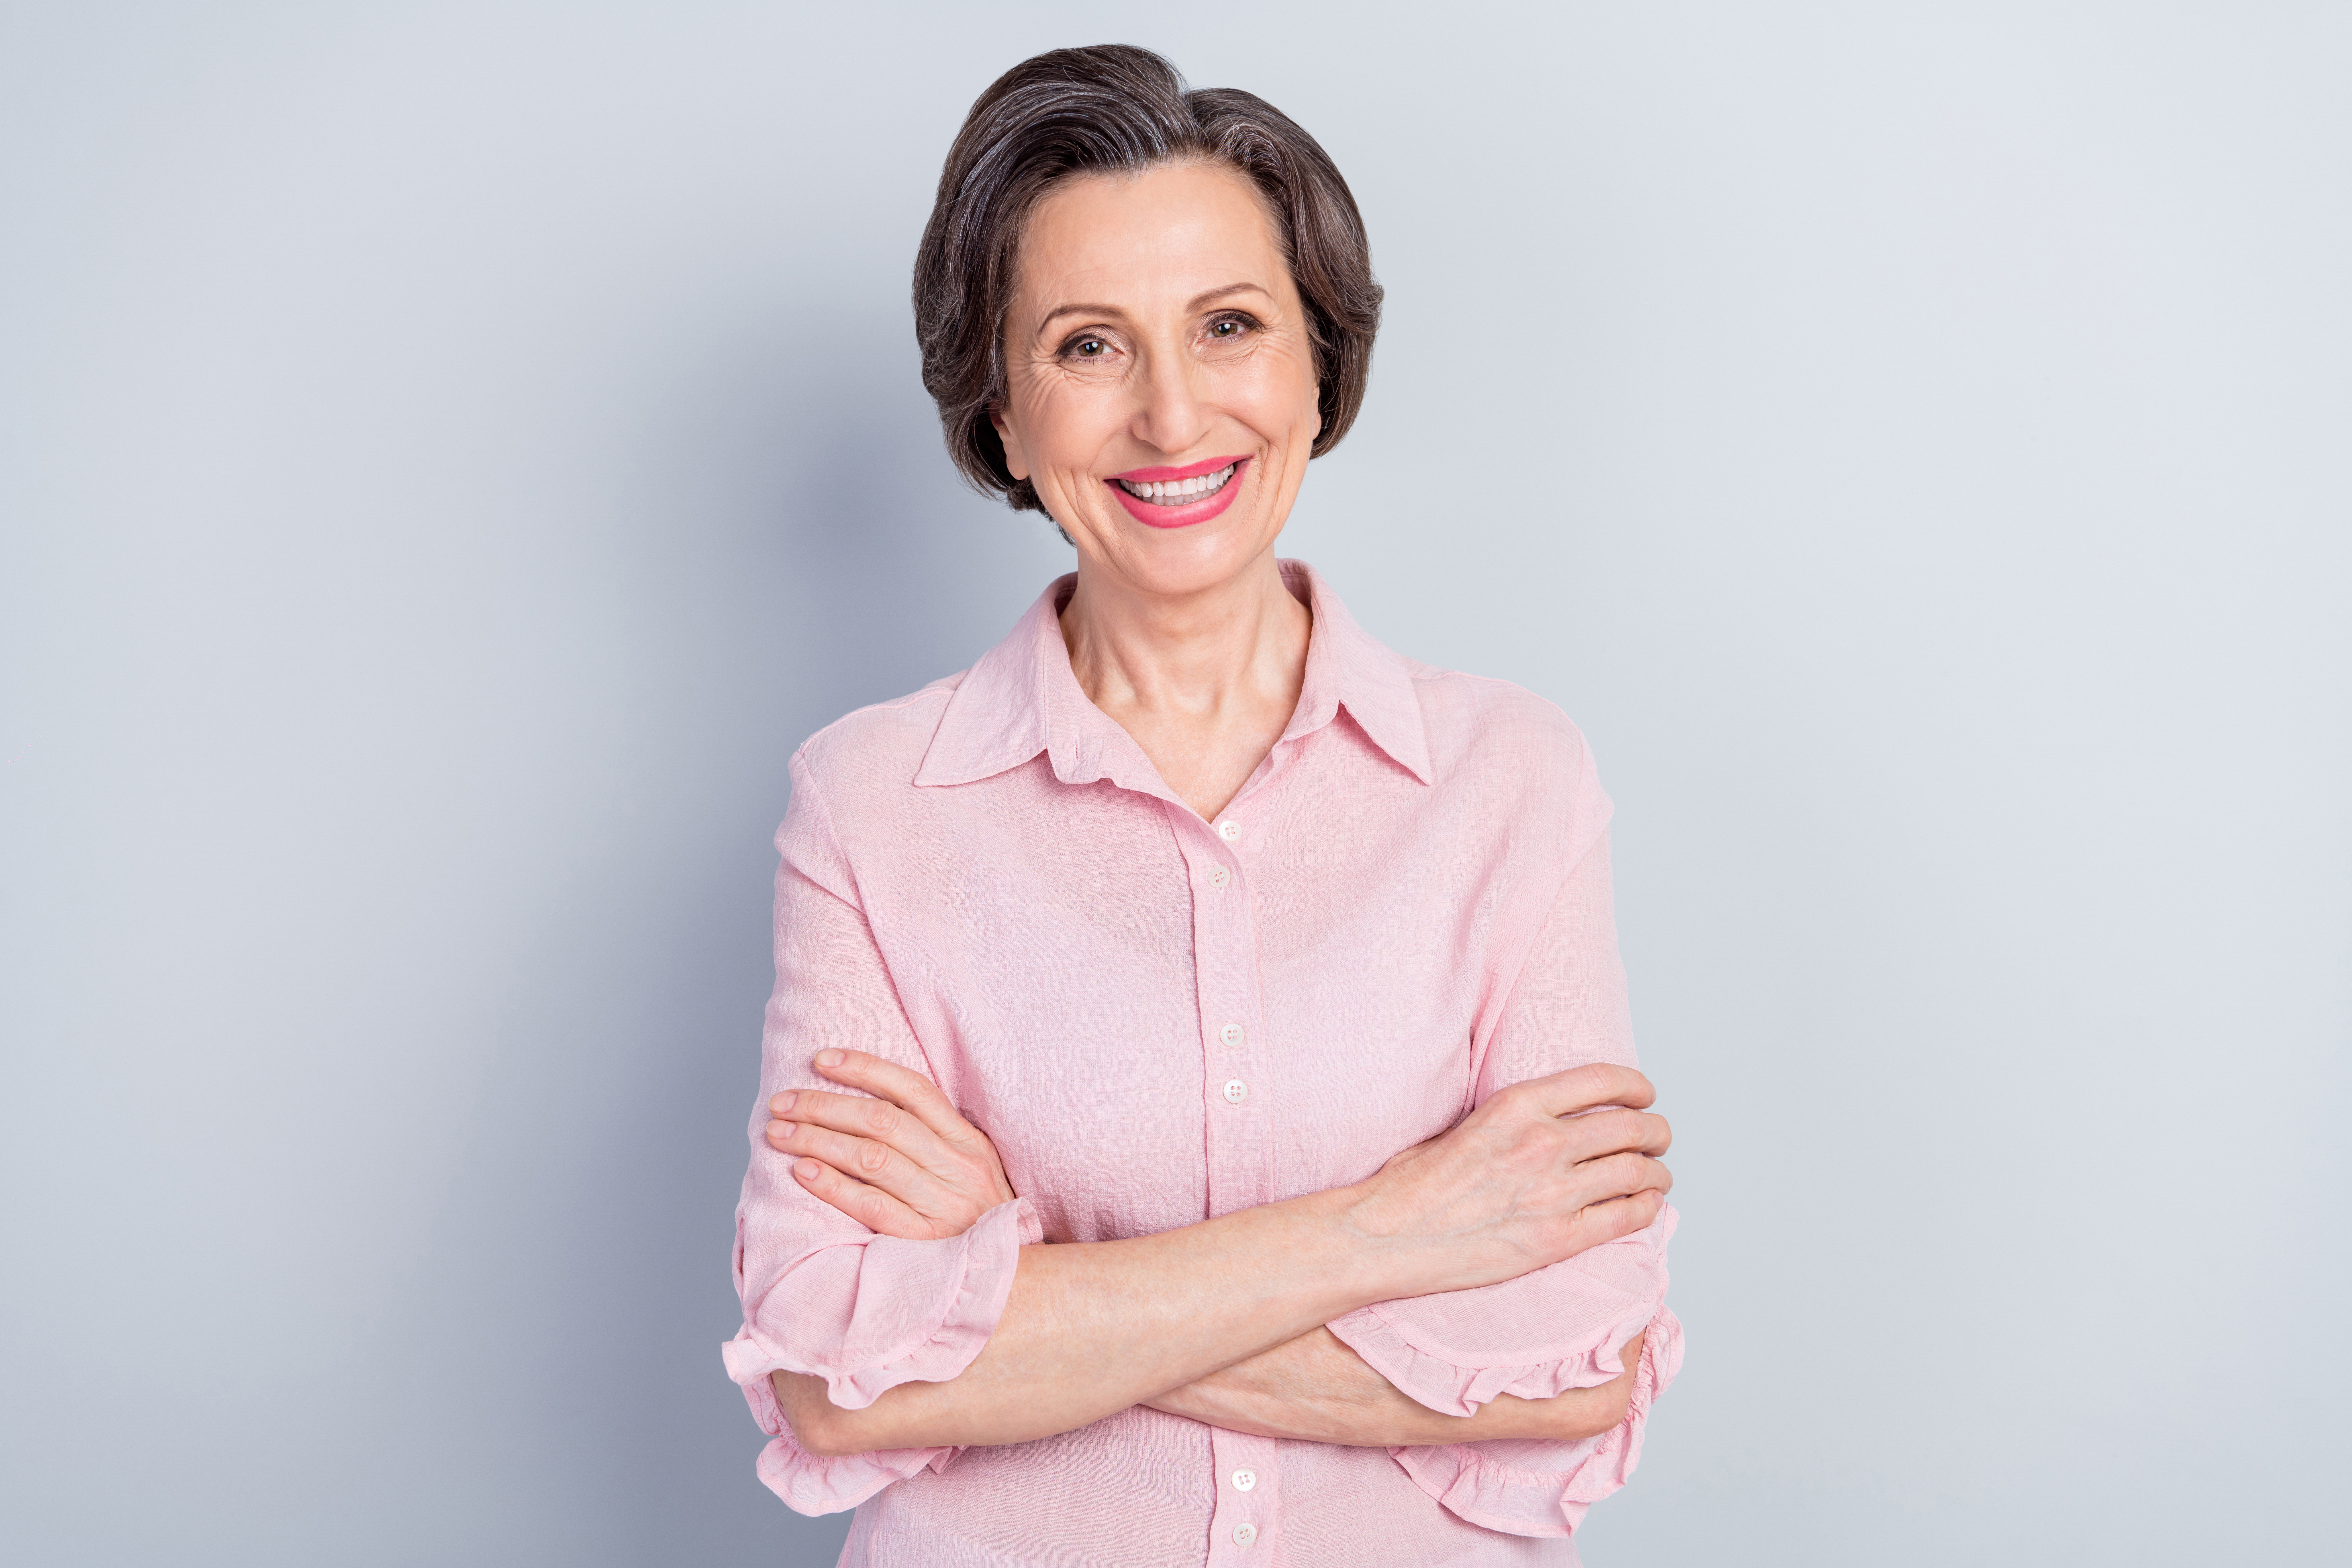 A smiling senior woman standing with her arms crossed | Source: Shutterstock